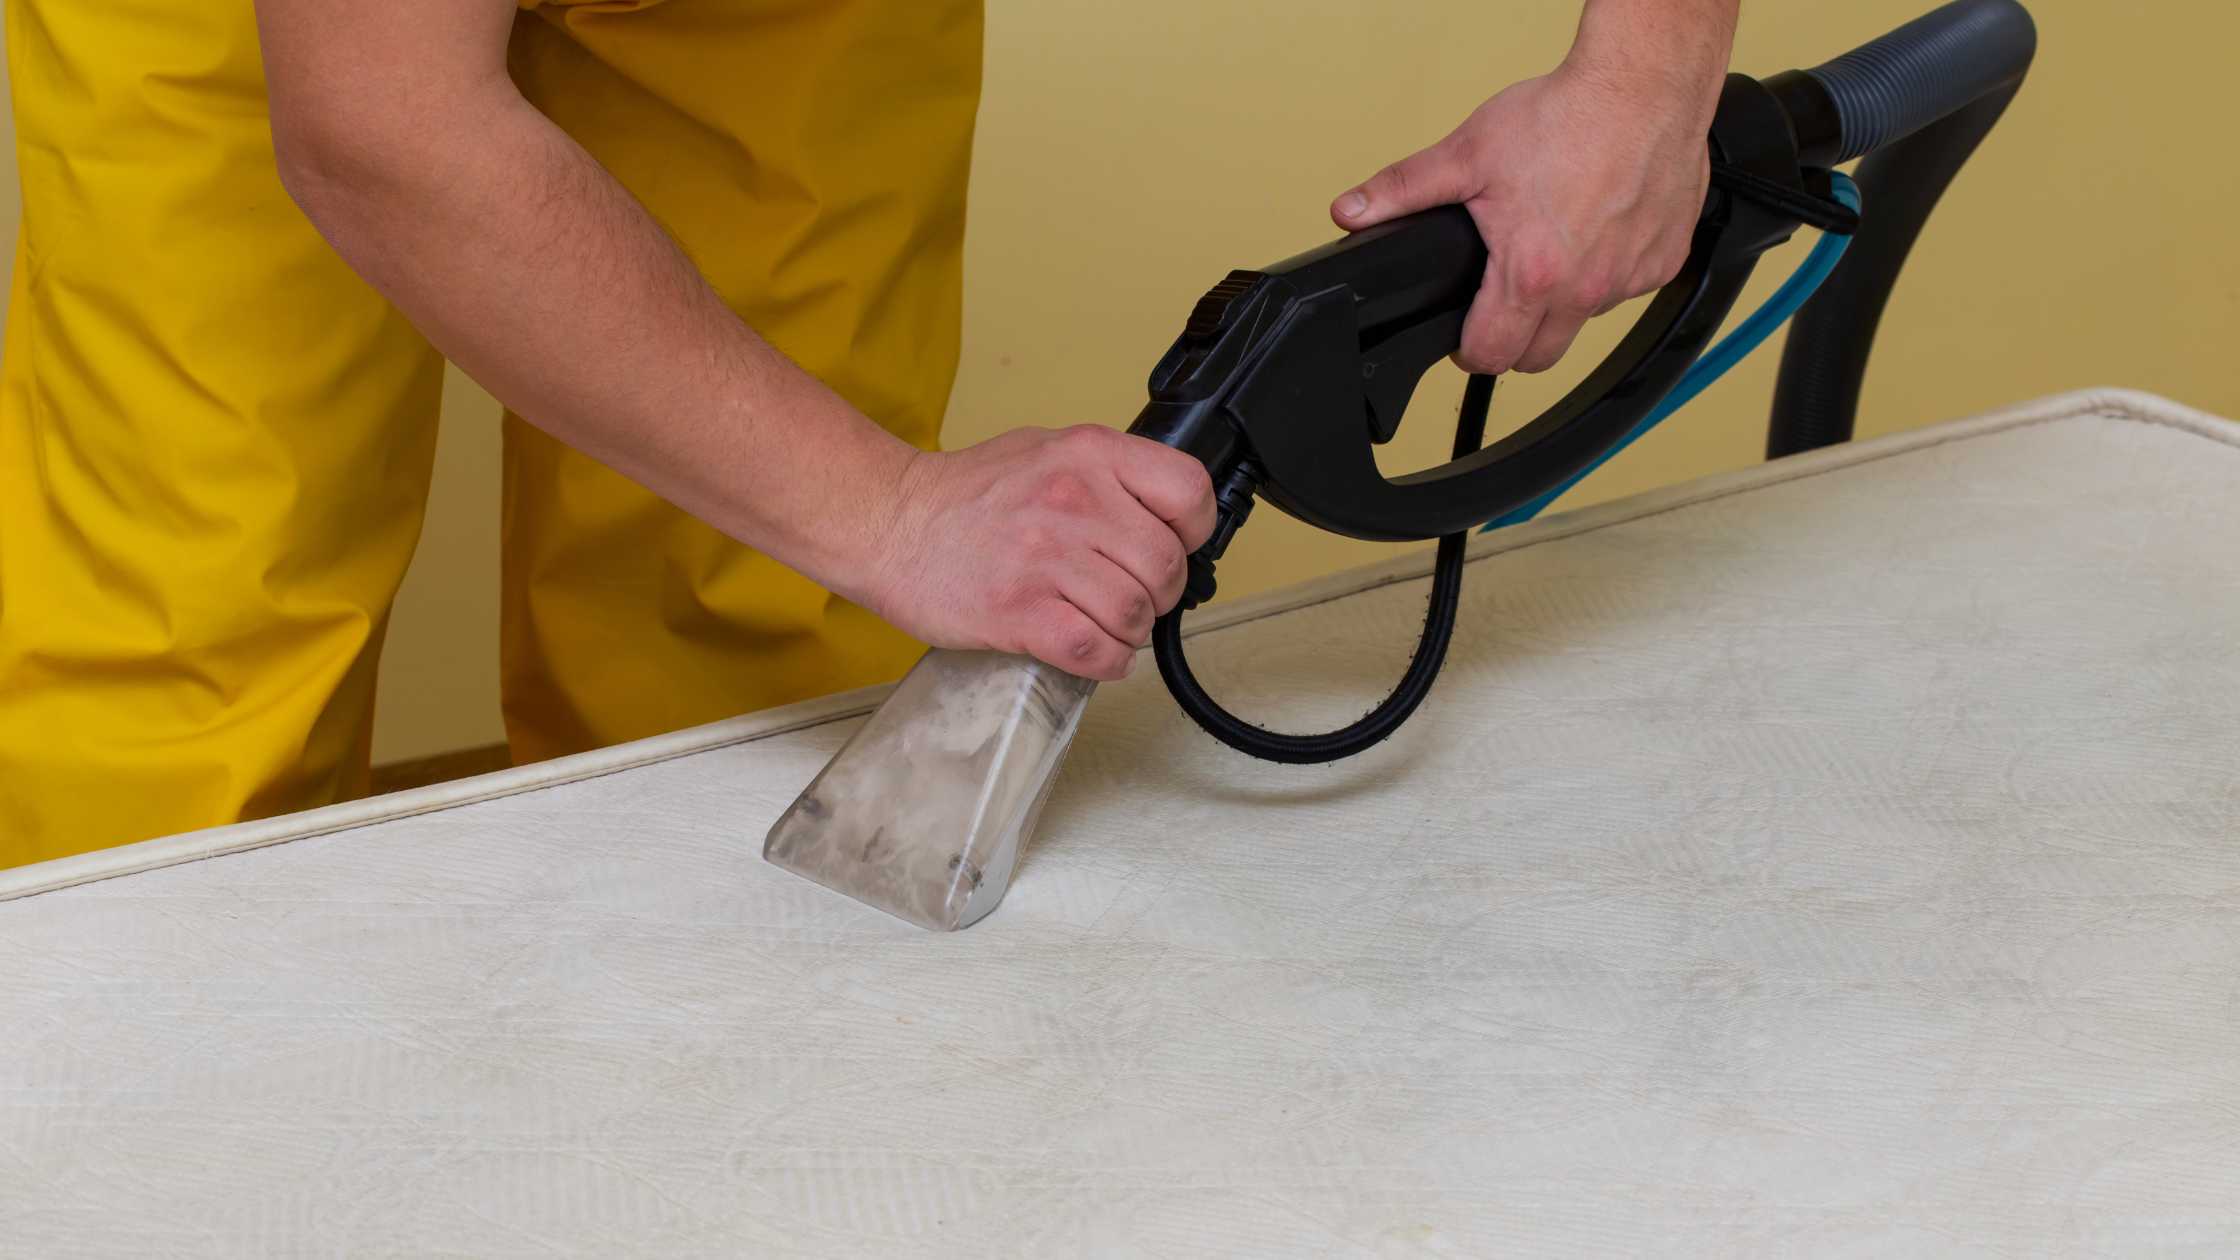 How to Extend Your Mattress Lifespan with Dubai's Premier Cleaning Service